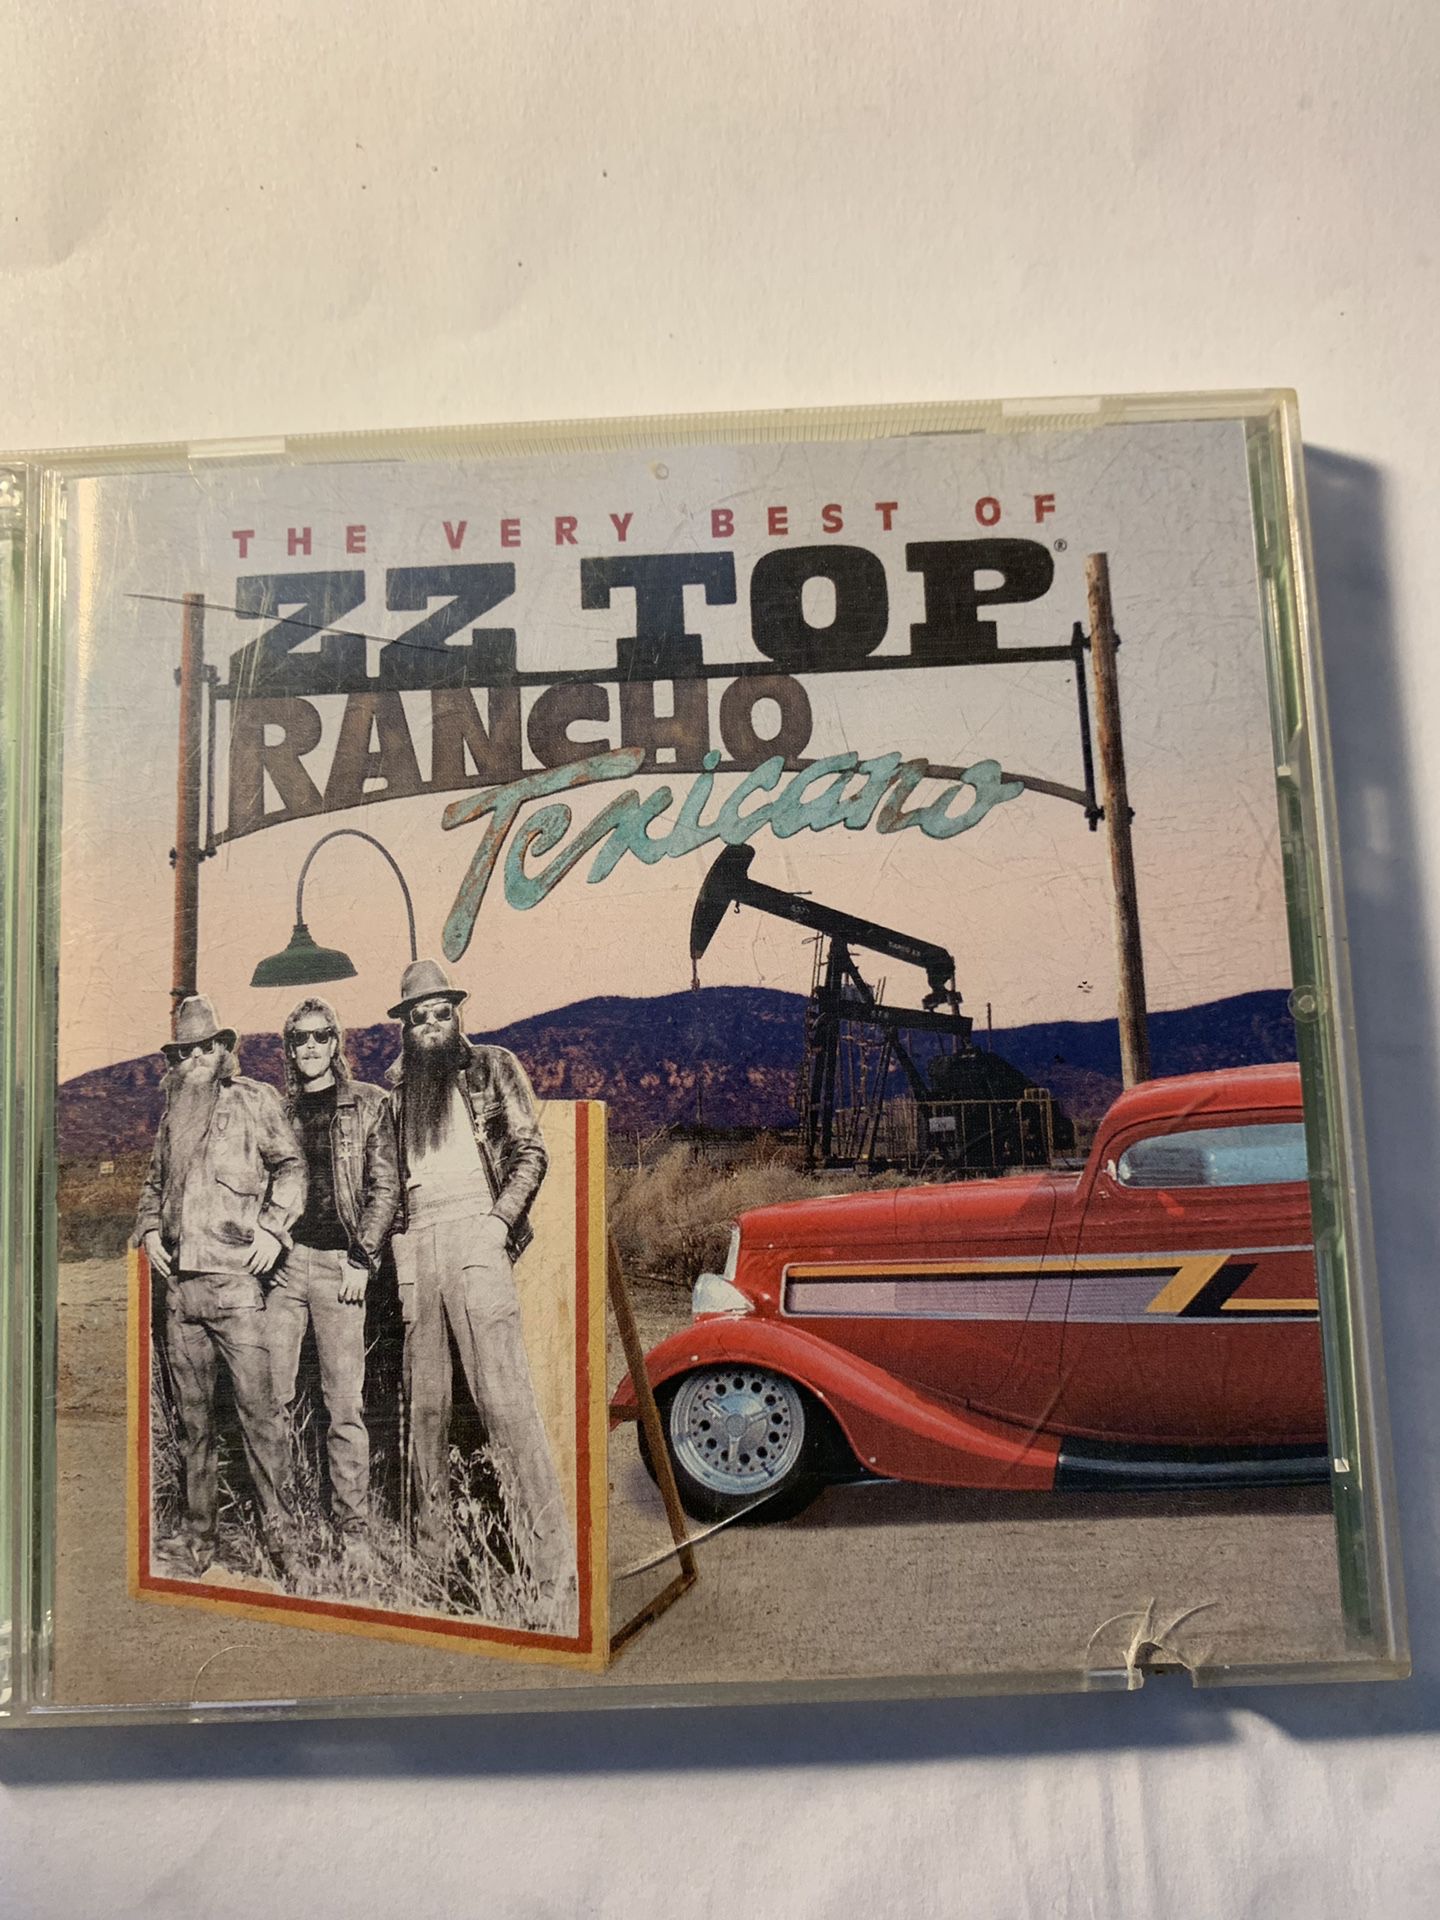 The Very Best of ZZ Top. Ranch Texicano 2cds